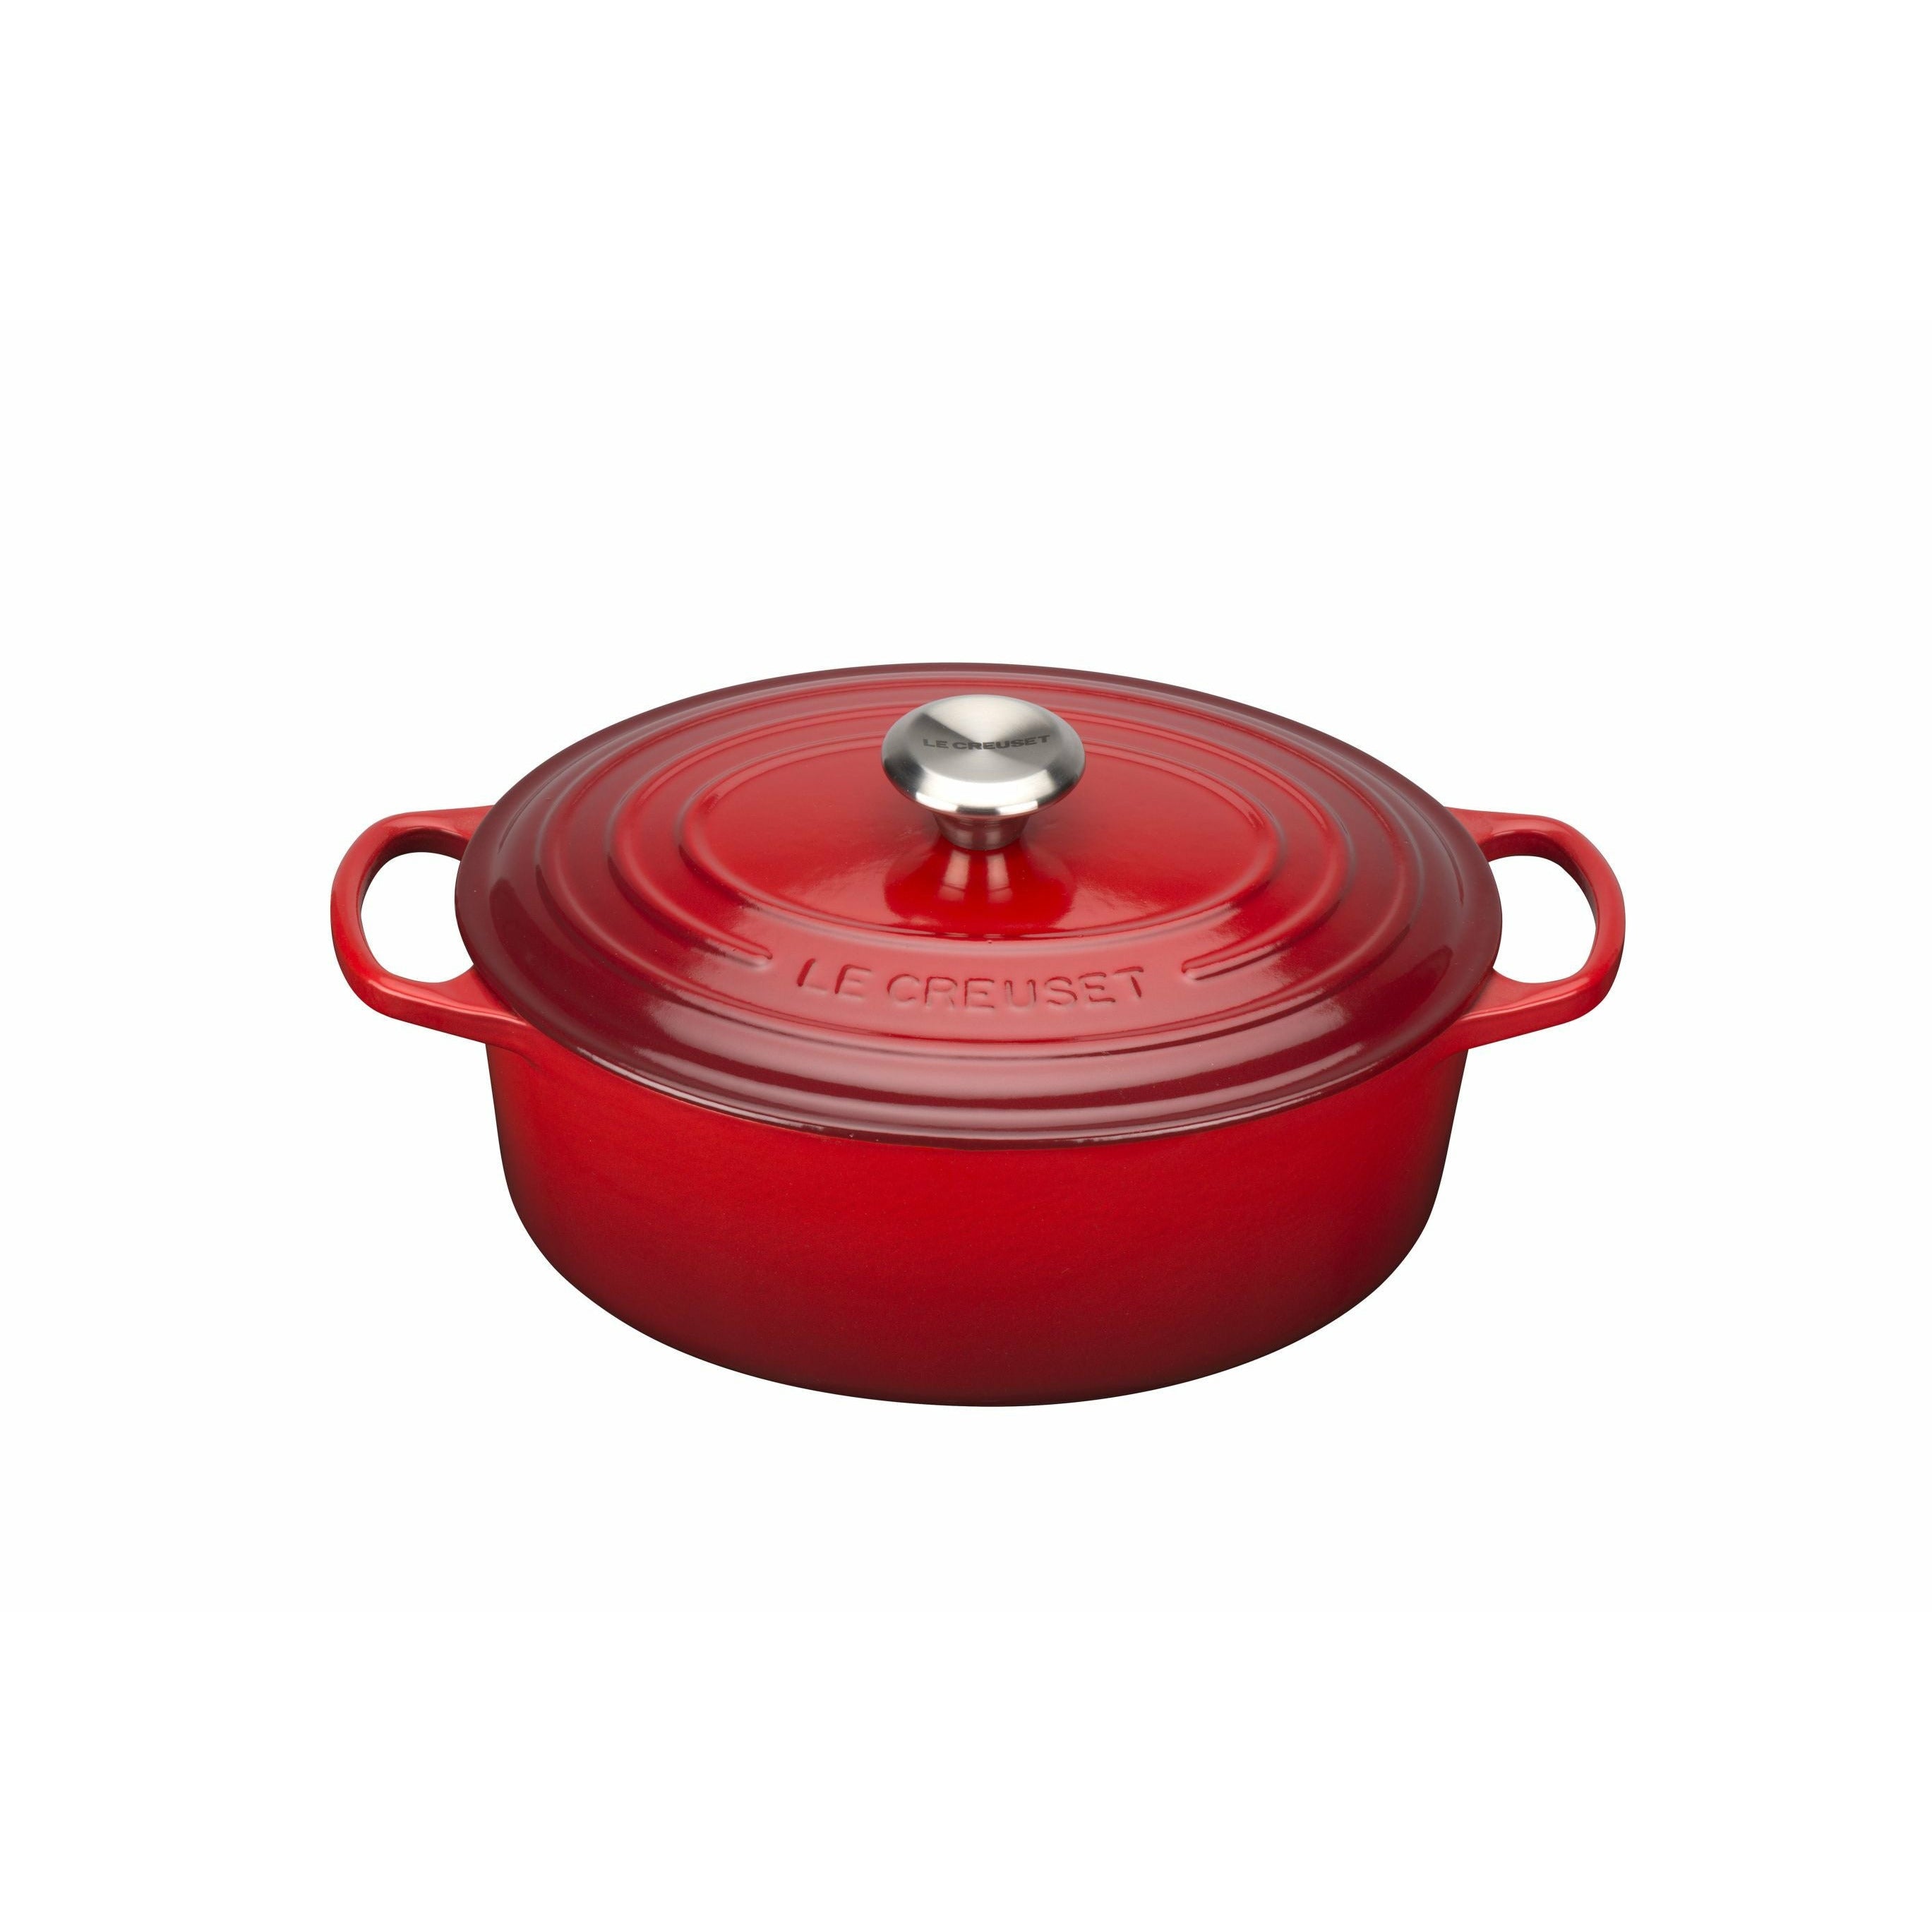 Le Creuset Signature Oval Roaster 29 Cm, Cherry Red